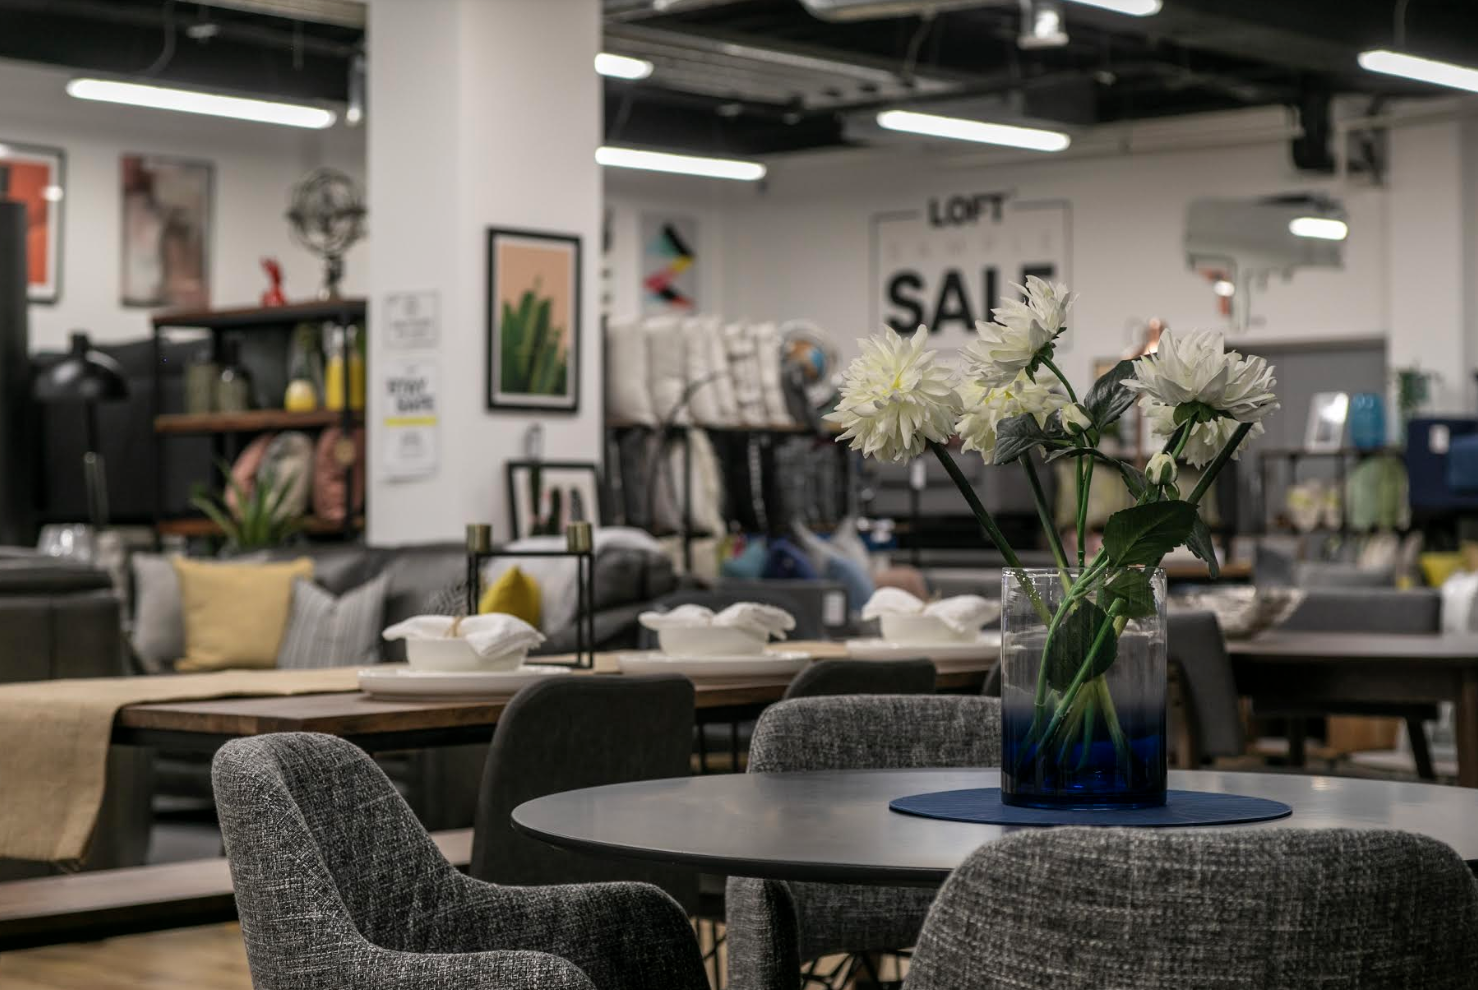 There&#8217;s some unmissable deals and offers in LOFT NQ&#8217;s pop-up &#8216;relocation sale&#8217;, The Manc